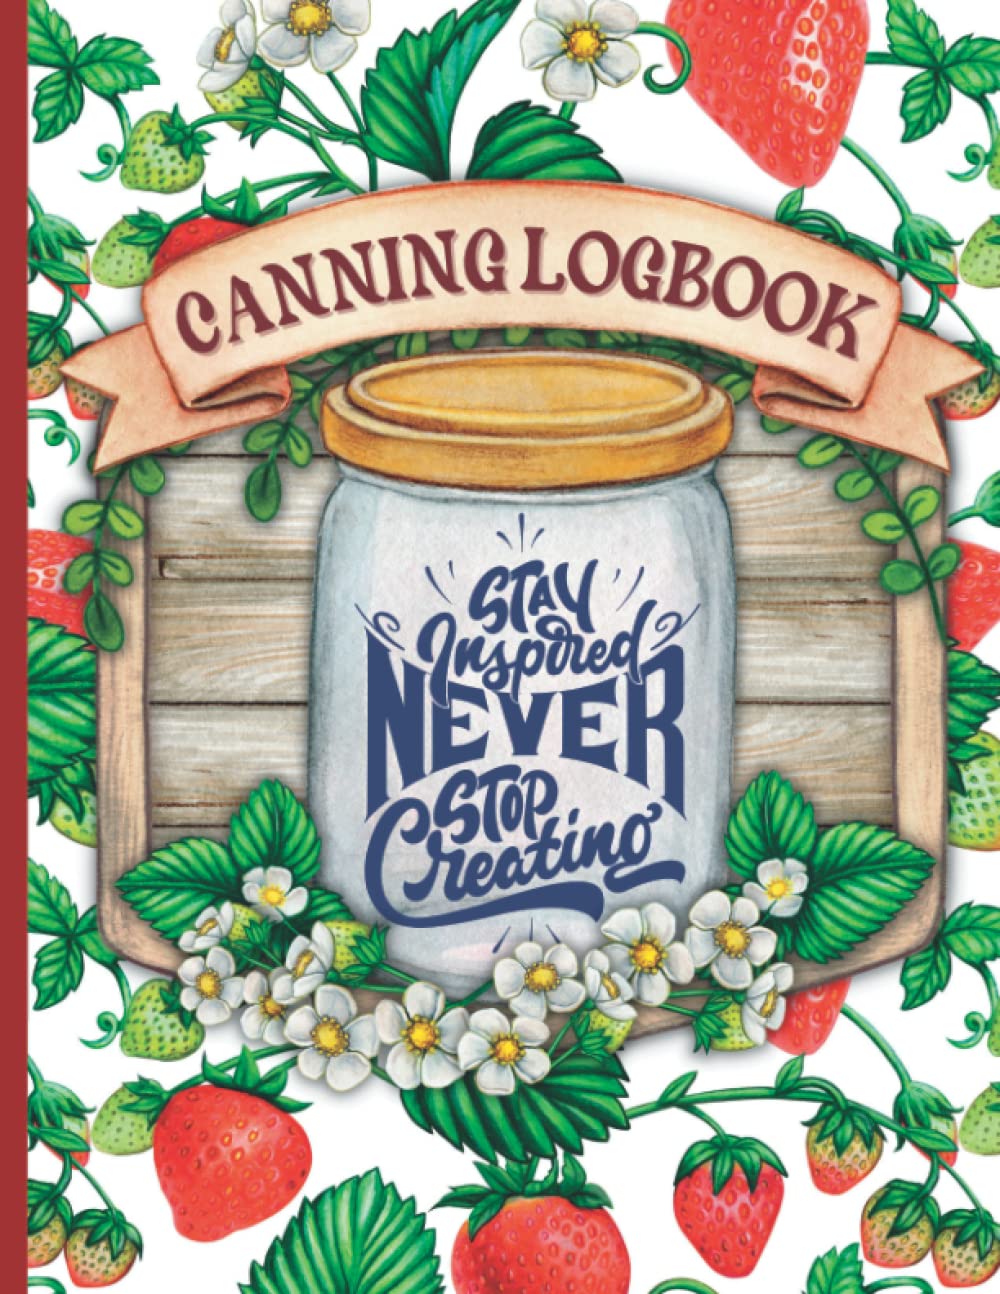 Canning Logbook | Stay Inspired Never Stop Creating | Canning Journal: Canner’s Log Book Prepper Pantry Inventory Tracker And Journal | 100 Pages | 8.5″ X 11″